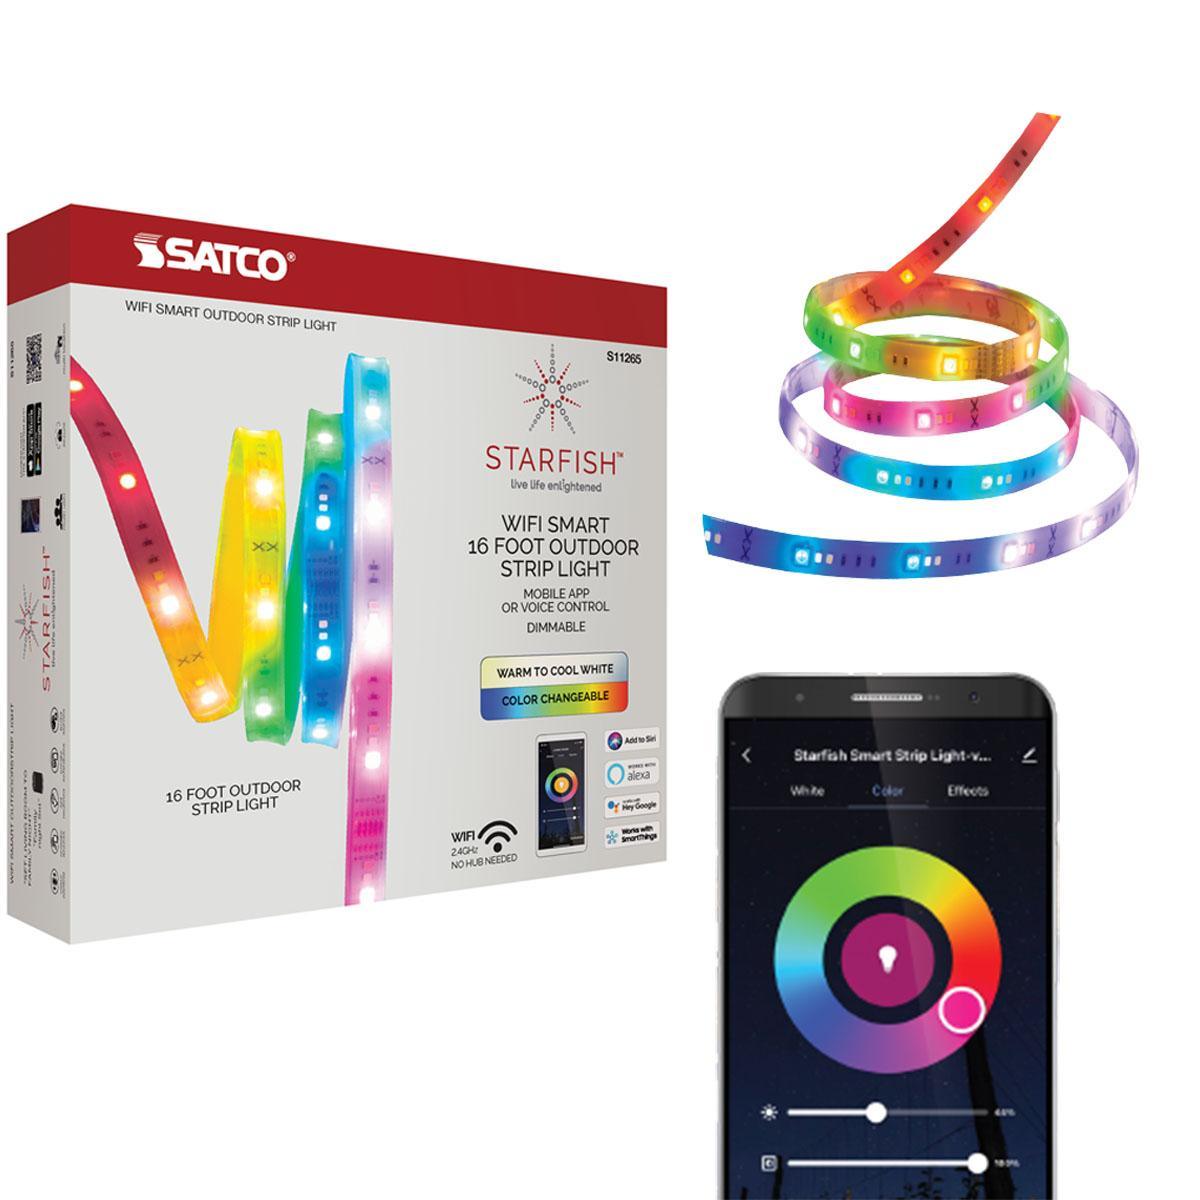 Starfish Wifi Smart Outdoor LED Strip Light kit, 16 feet Tape with Power Supply, Color Changing RGB and Tunable White, 12V - Bees Lighting